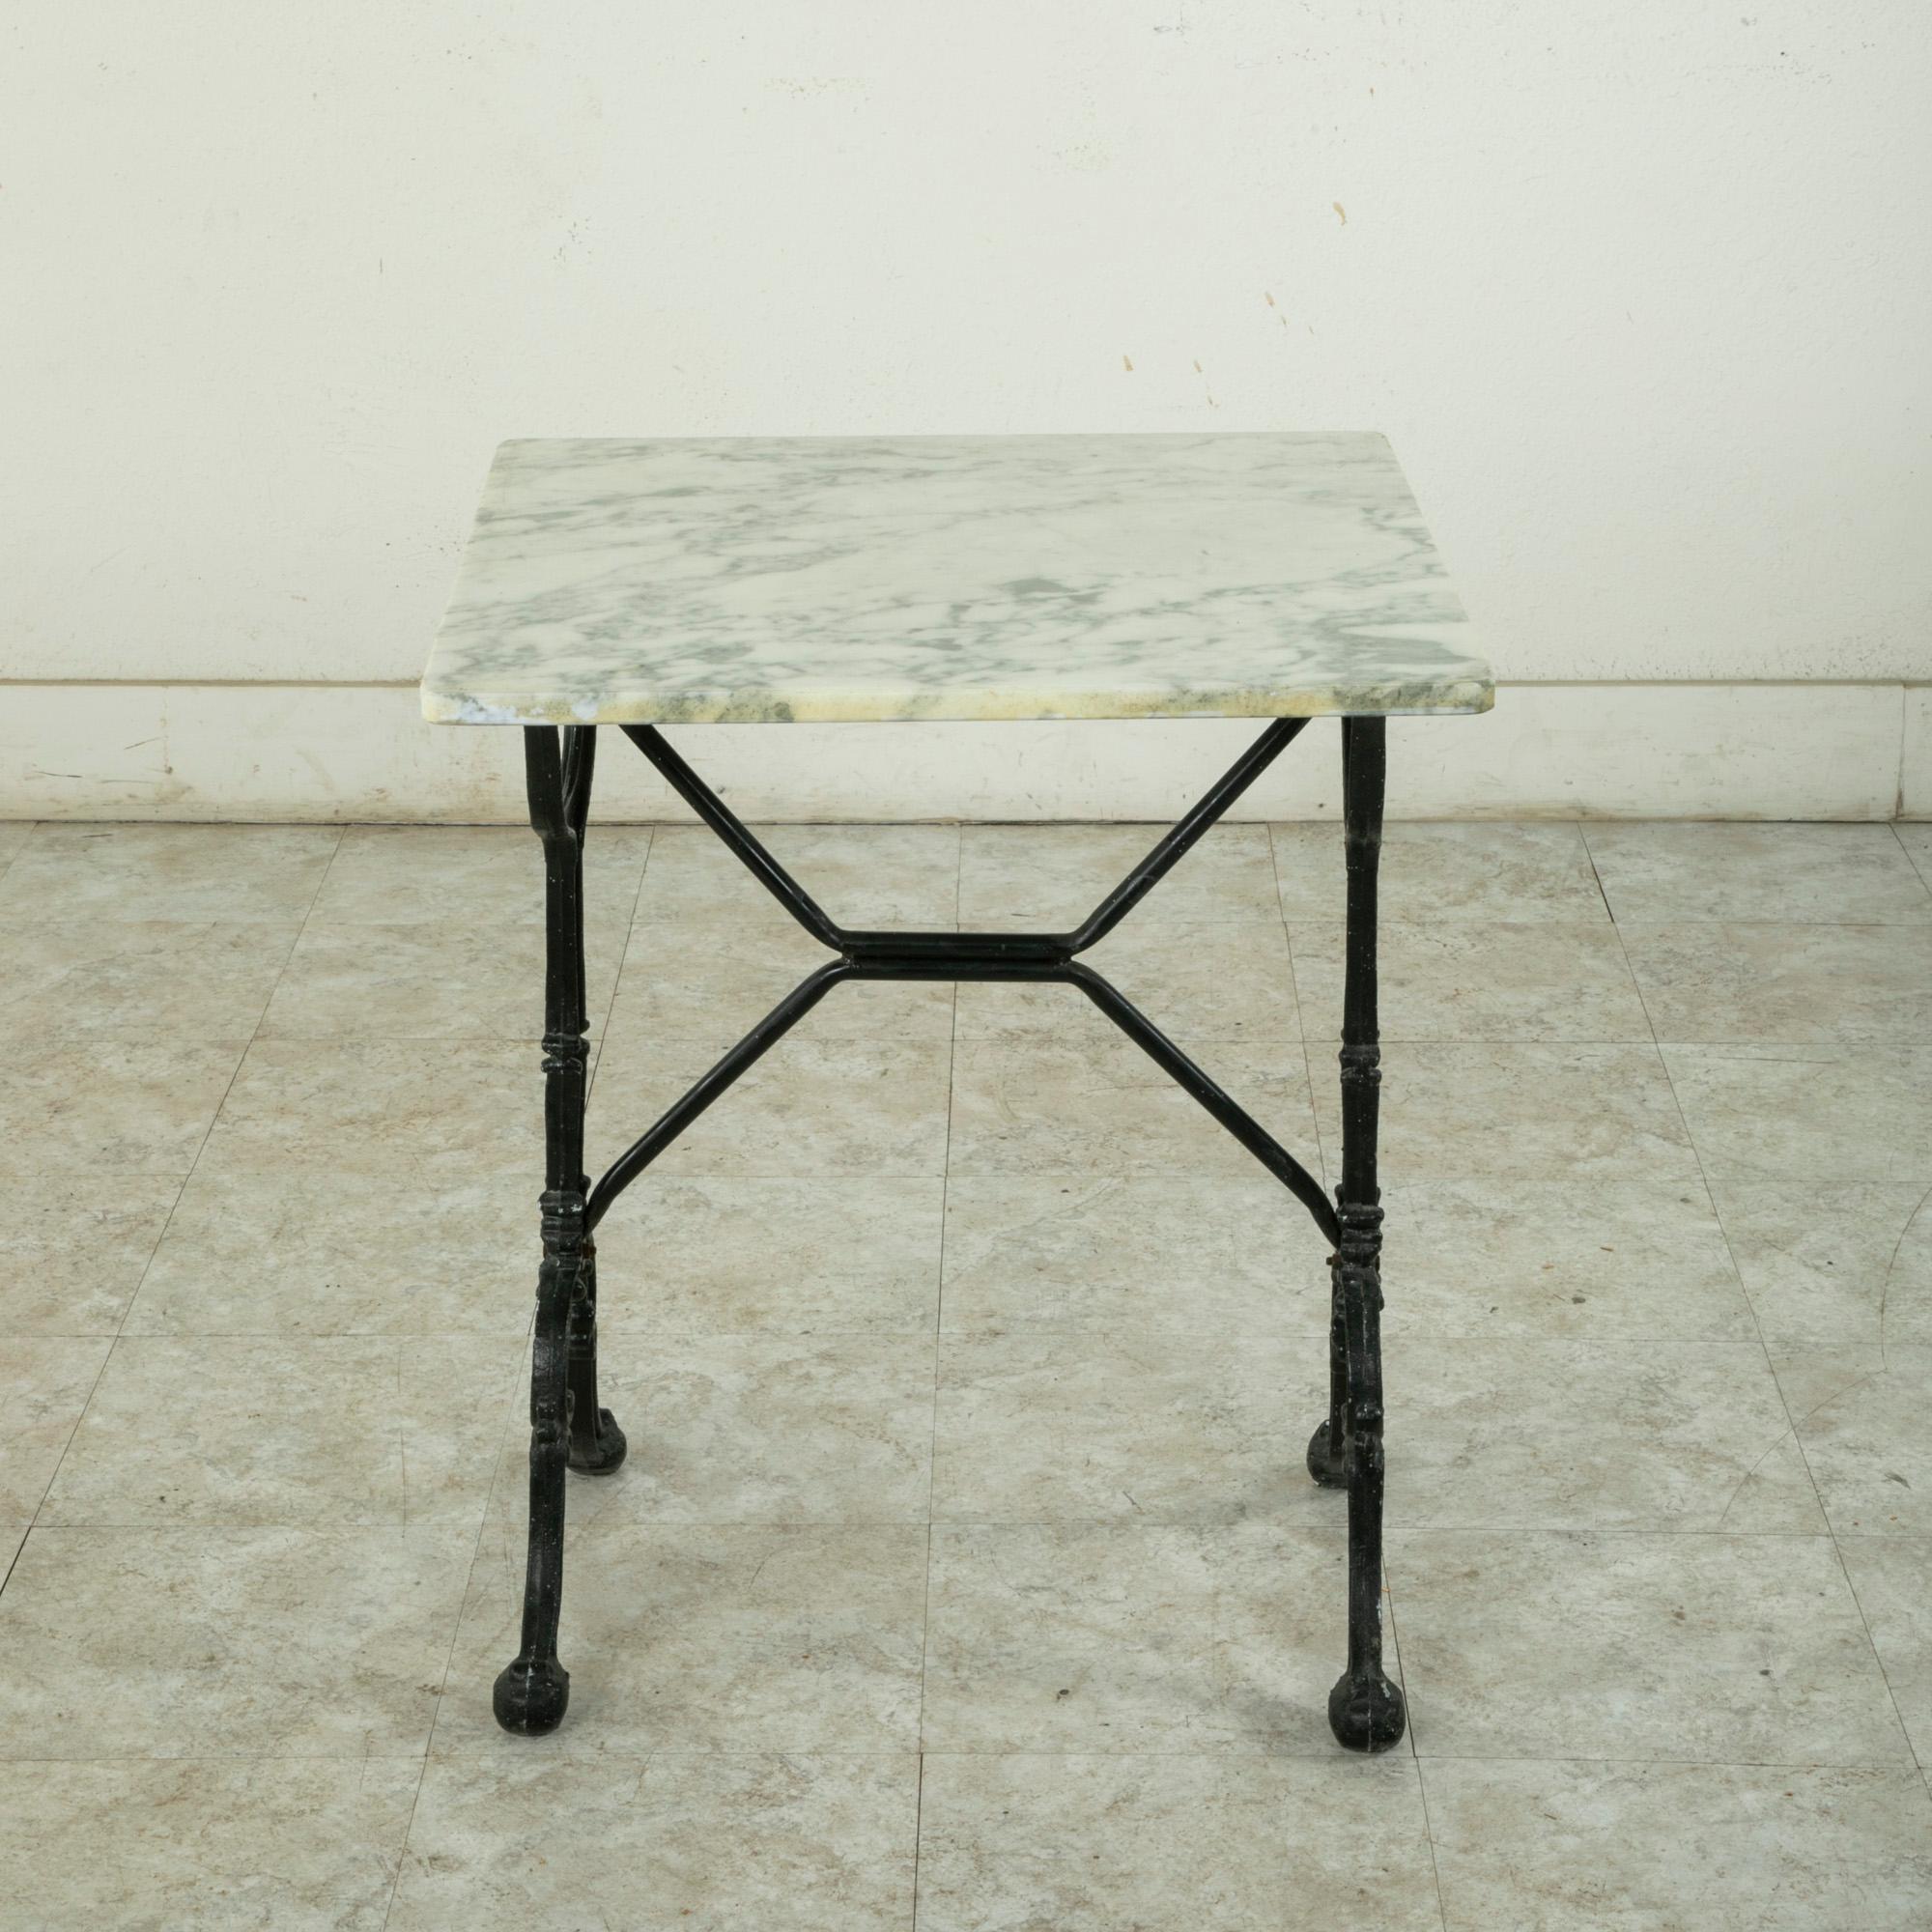 Originally used in a French brasserie during the mid-twentieth century, this cast iron bistro table or cafe table features a solid 23.75 inch square white marble top with grey veining. Scrolled iron legs support the top and are joined by an